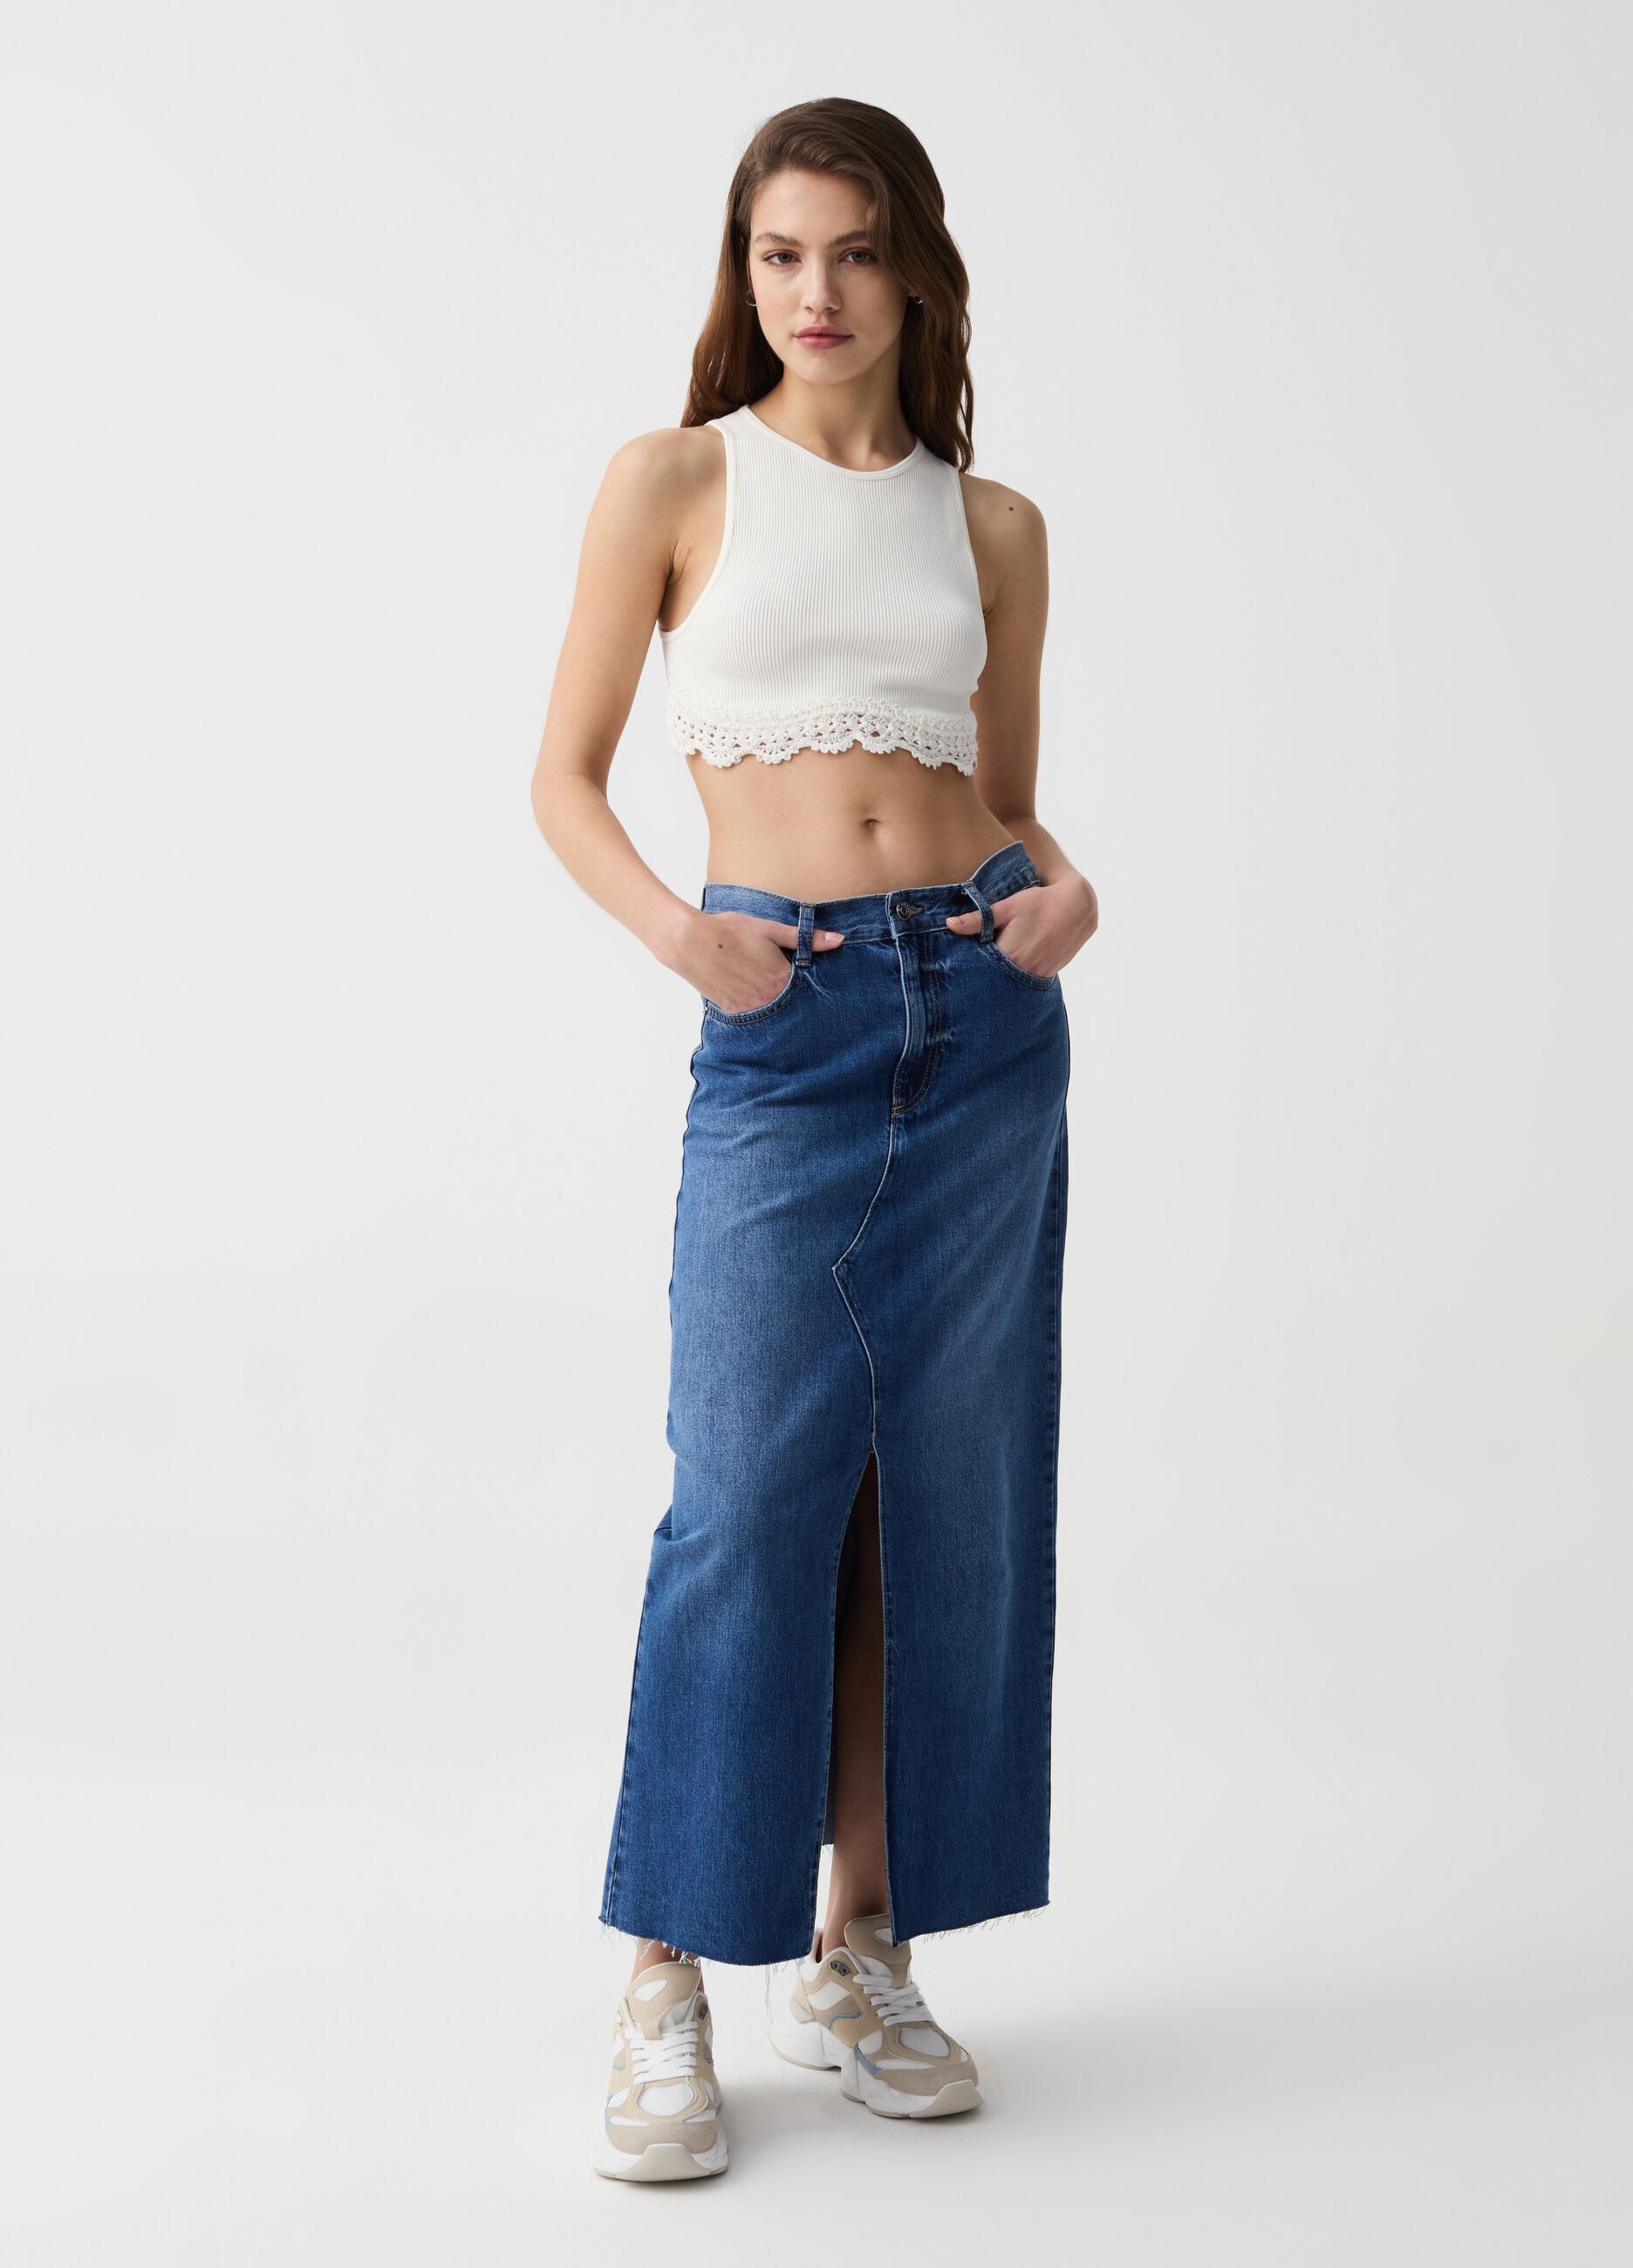 Ribbed crop top with crochet insert